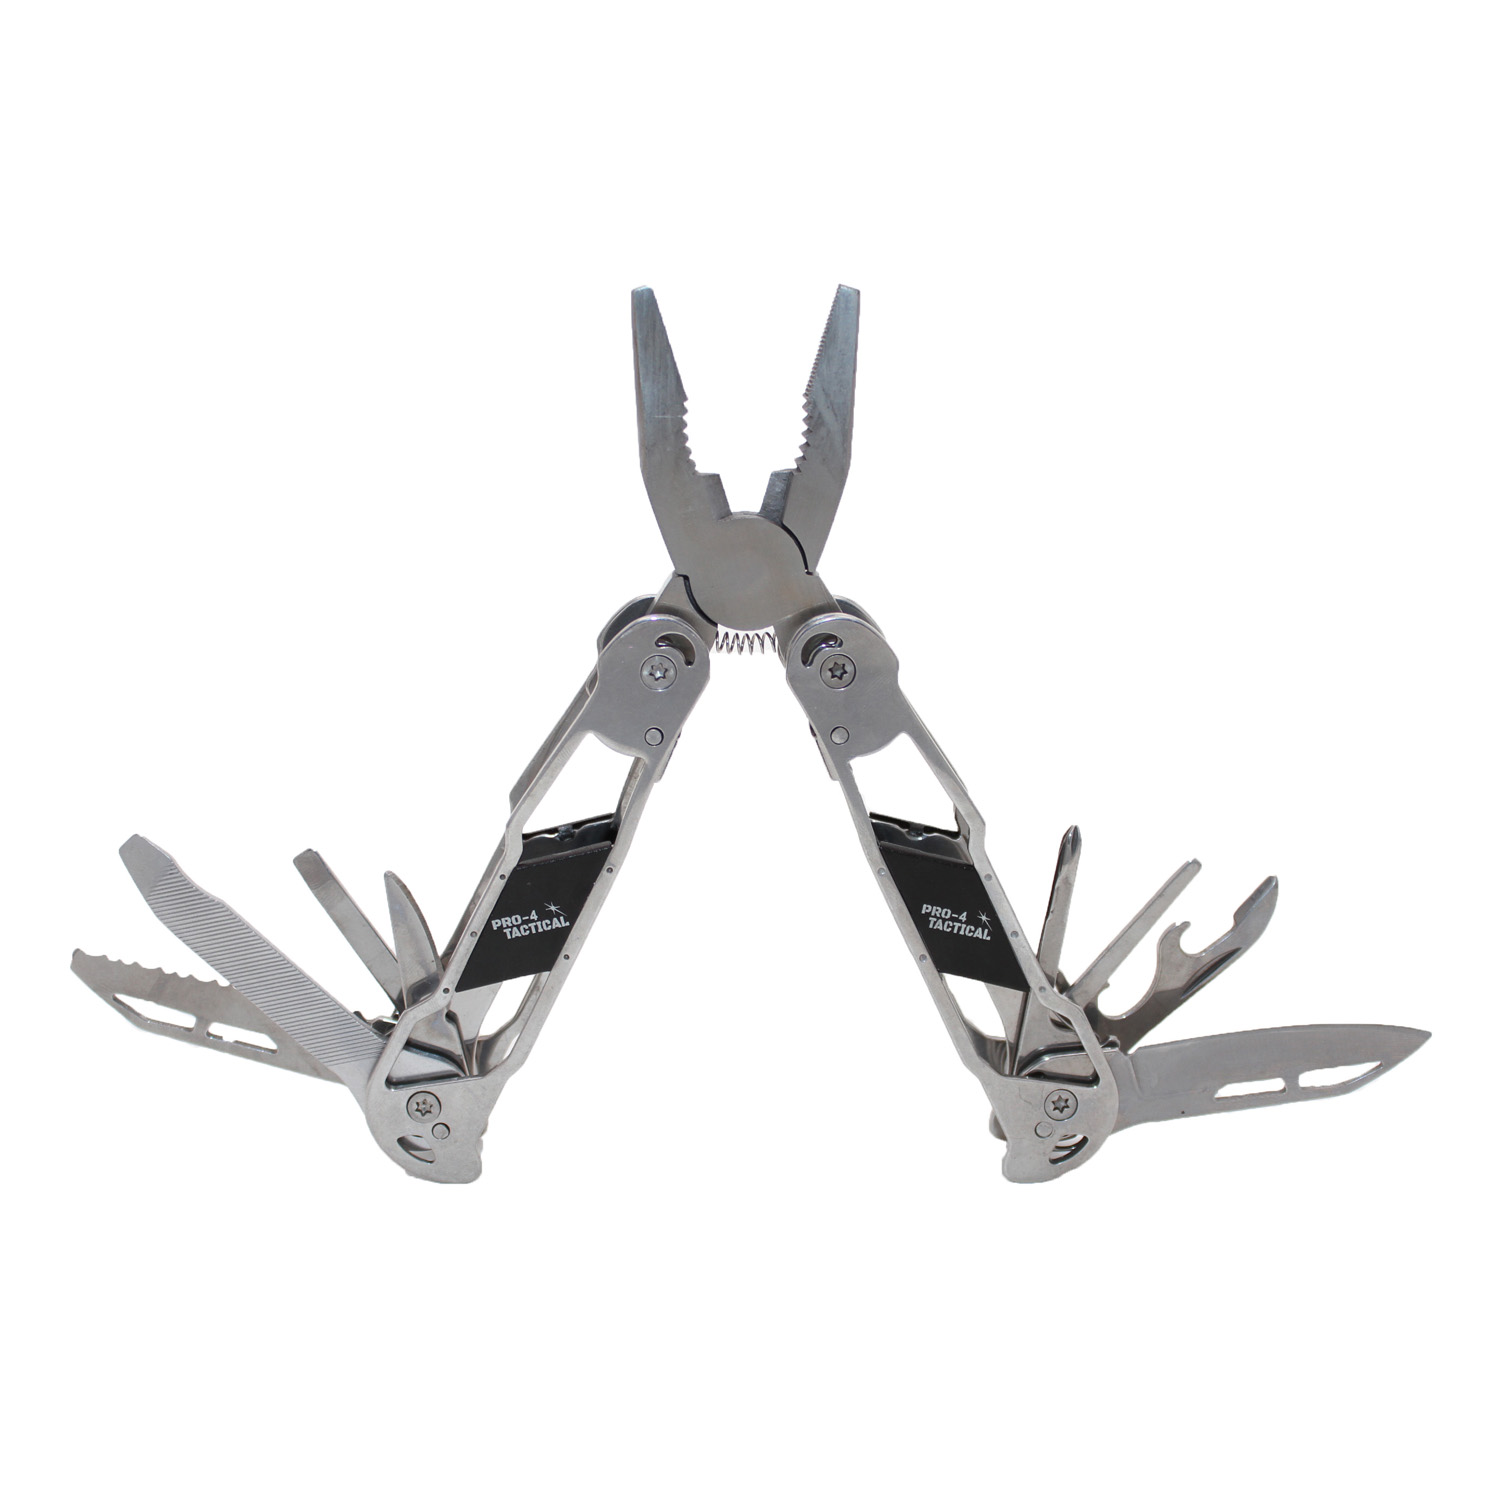 Pro-4 Power Tactical 12-in-1 Multi-Tool Pliers With Bonus Carrying Case